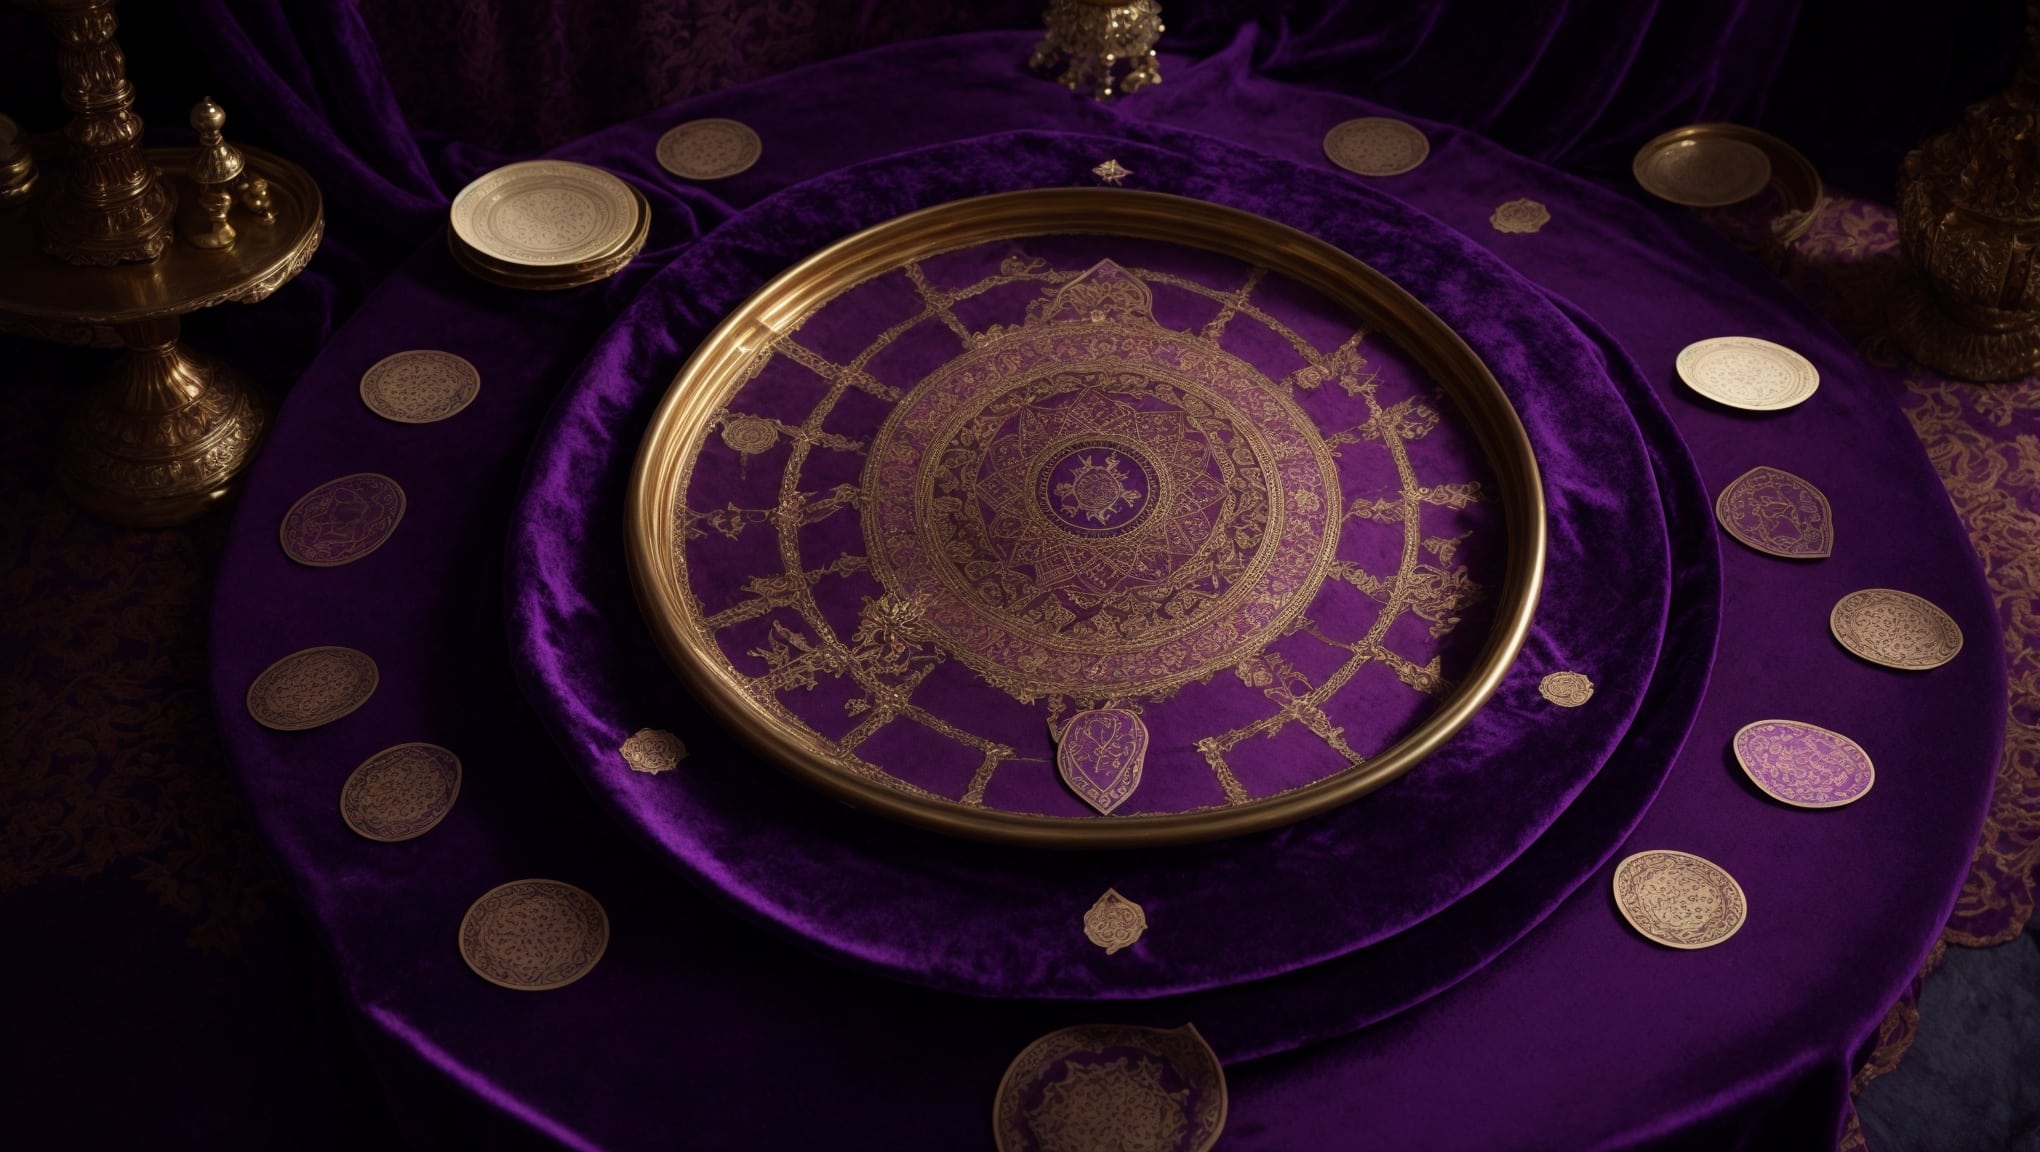 A mystic table with purple velvet holds a circle of 22 Major Arcana tarot cards, central crystal ball glowing for understanding major arcana tarot meanings.